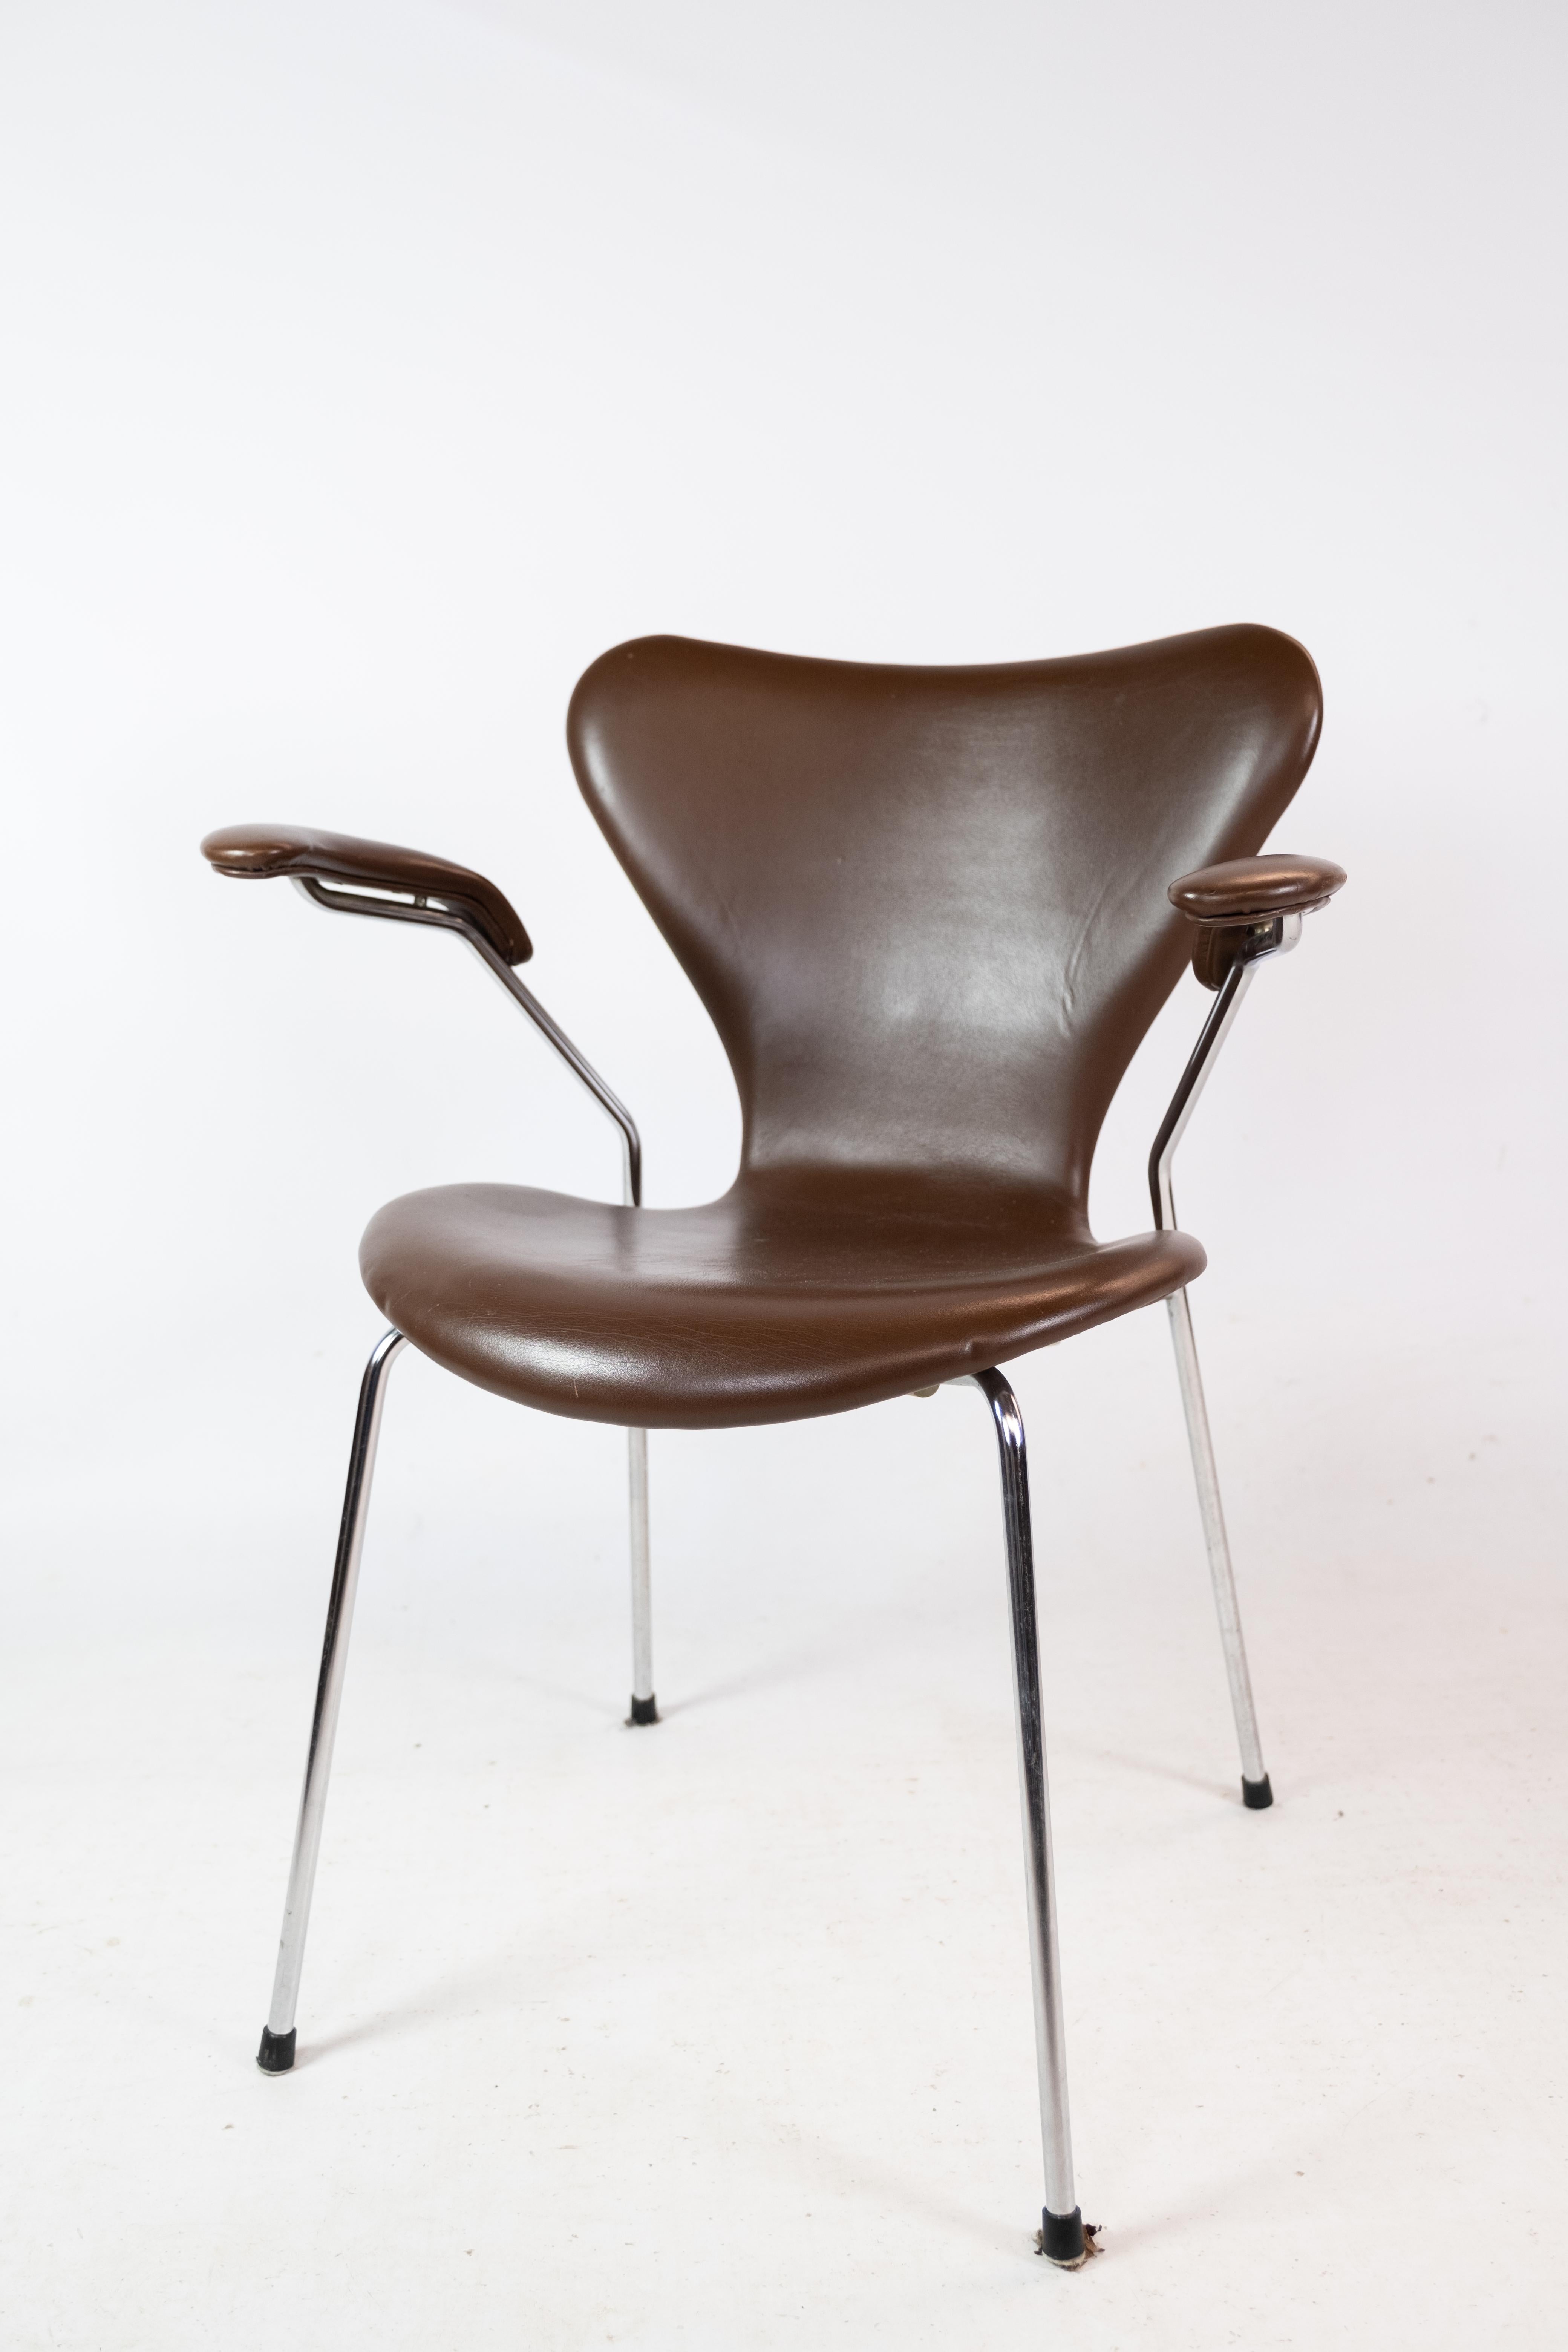 Set Of 2 Seven Chairs Model 3207 Made In Dark Brown Leather By Arne Jacobsen In Good Condition For Sale In Lejre, DK